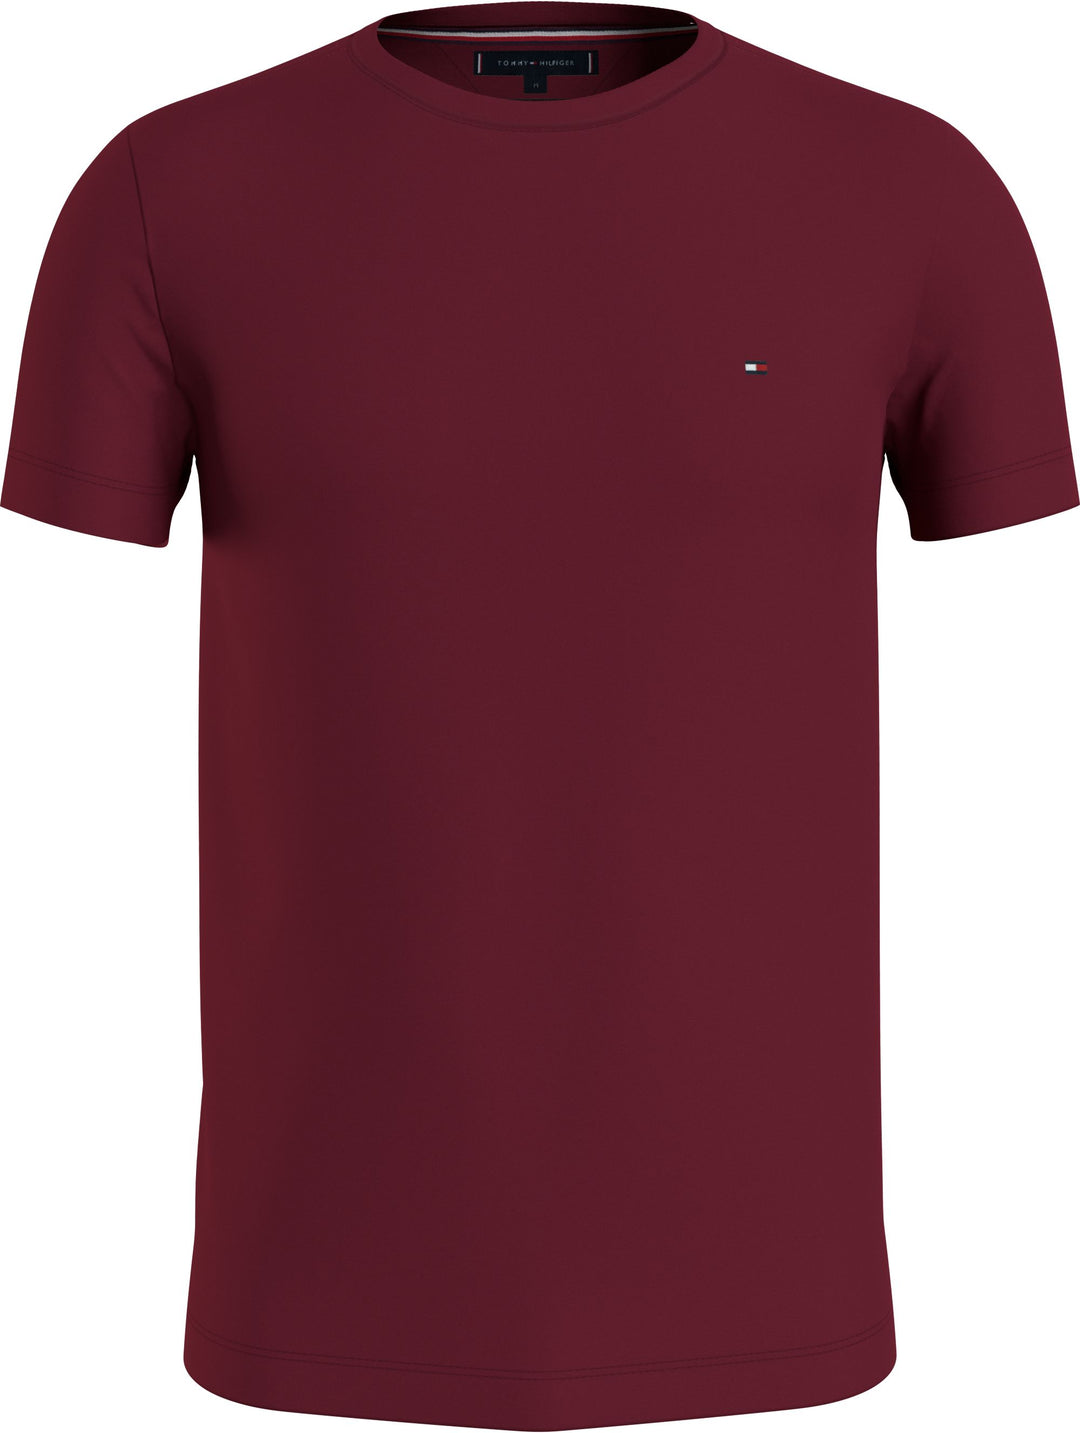 TH STRETCH SLIM FIT TEE - ROUGE